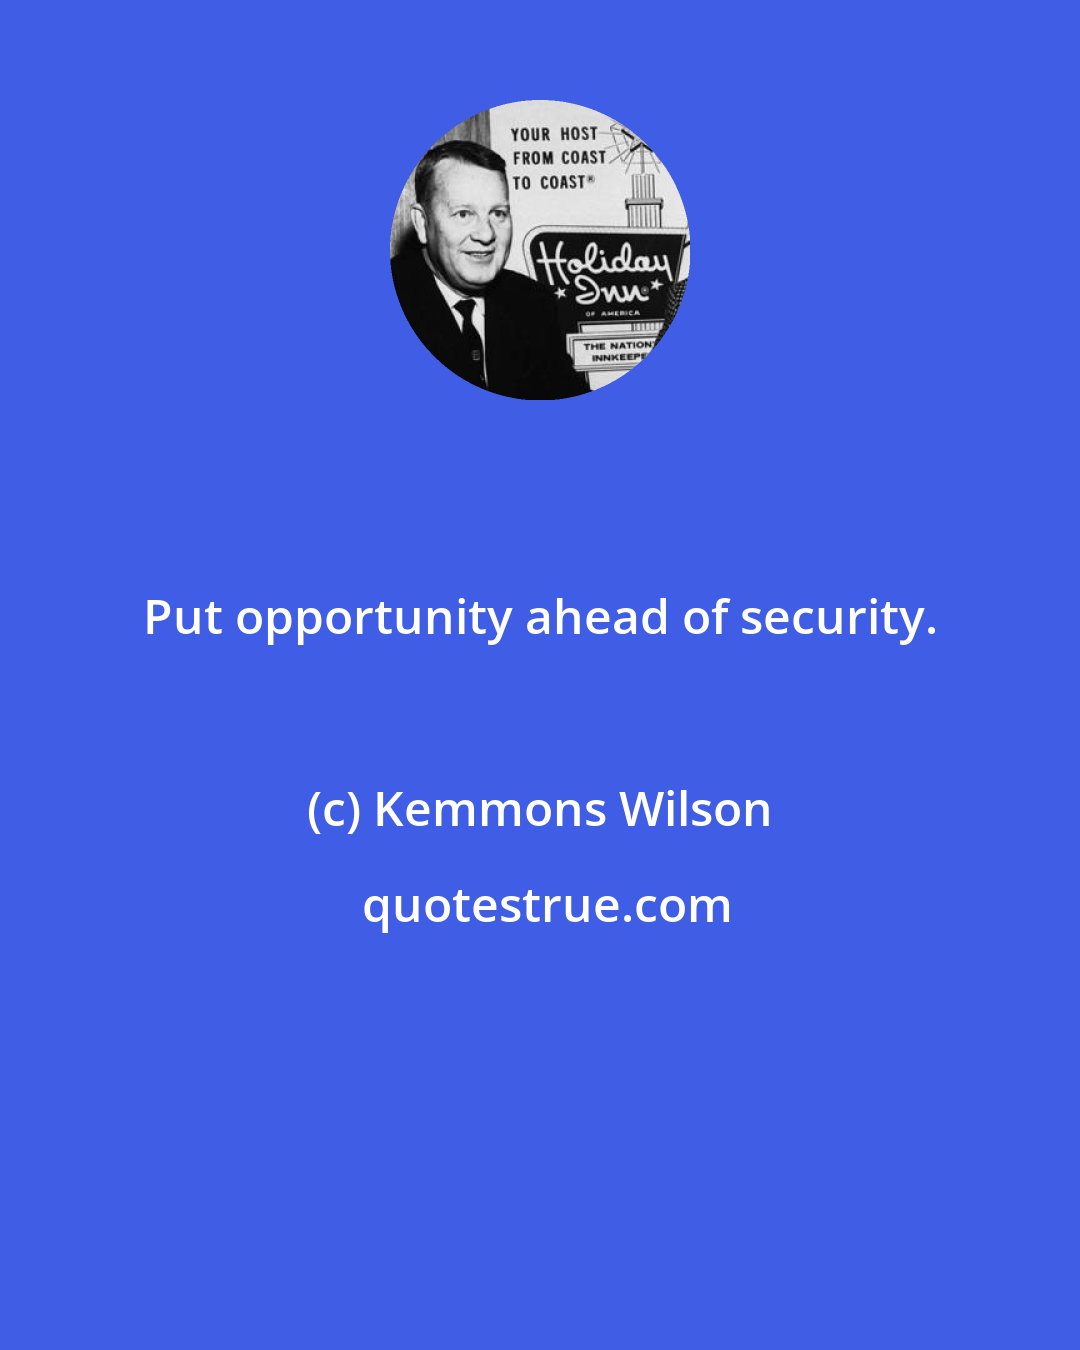 Kemmons Wilson: Put opportunity ahead of security.